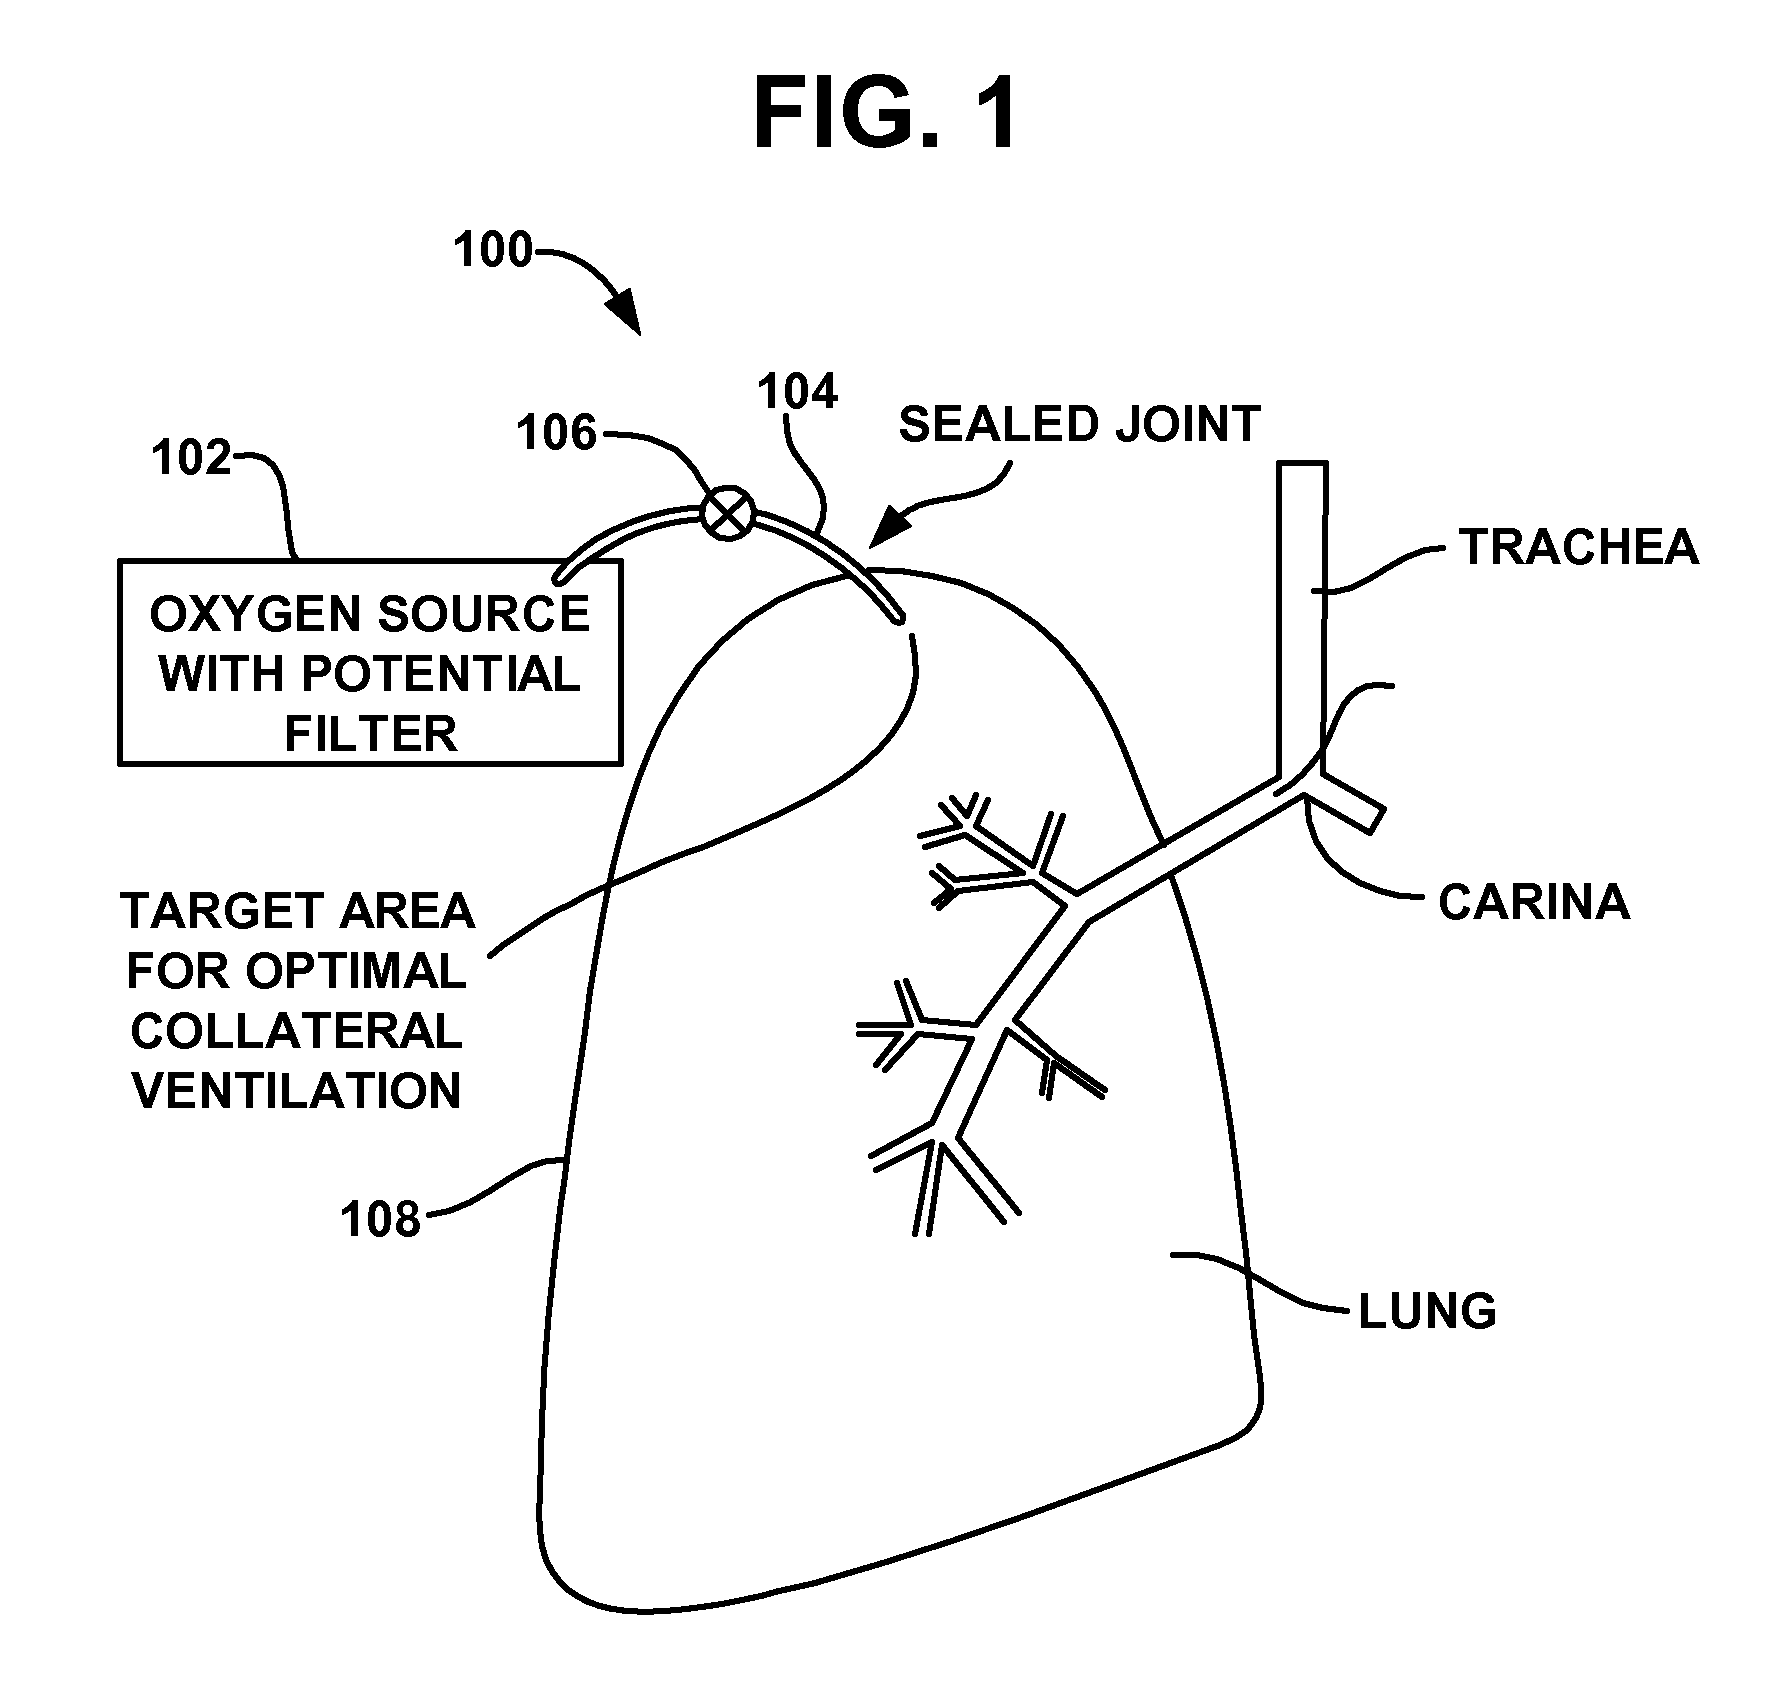 Implantable device and method for creating a localized pleurodesis and treating a lung through the localized pleurodesis